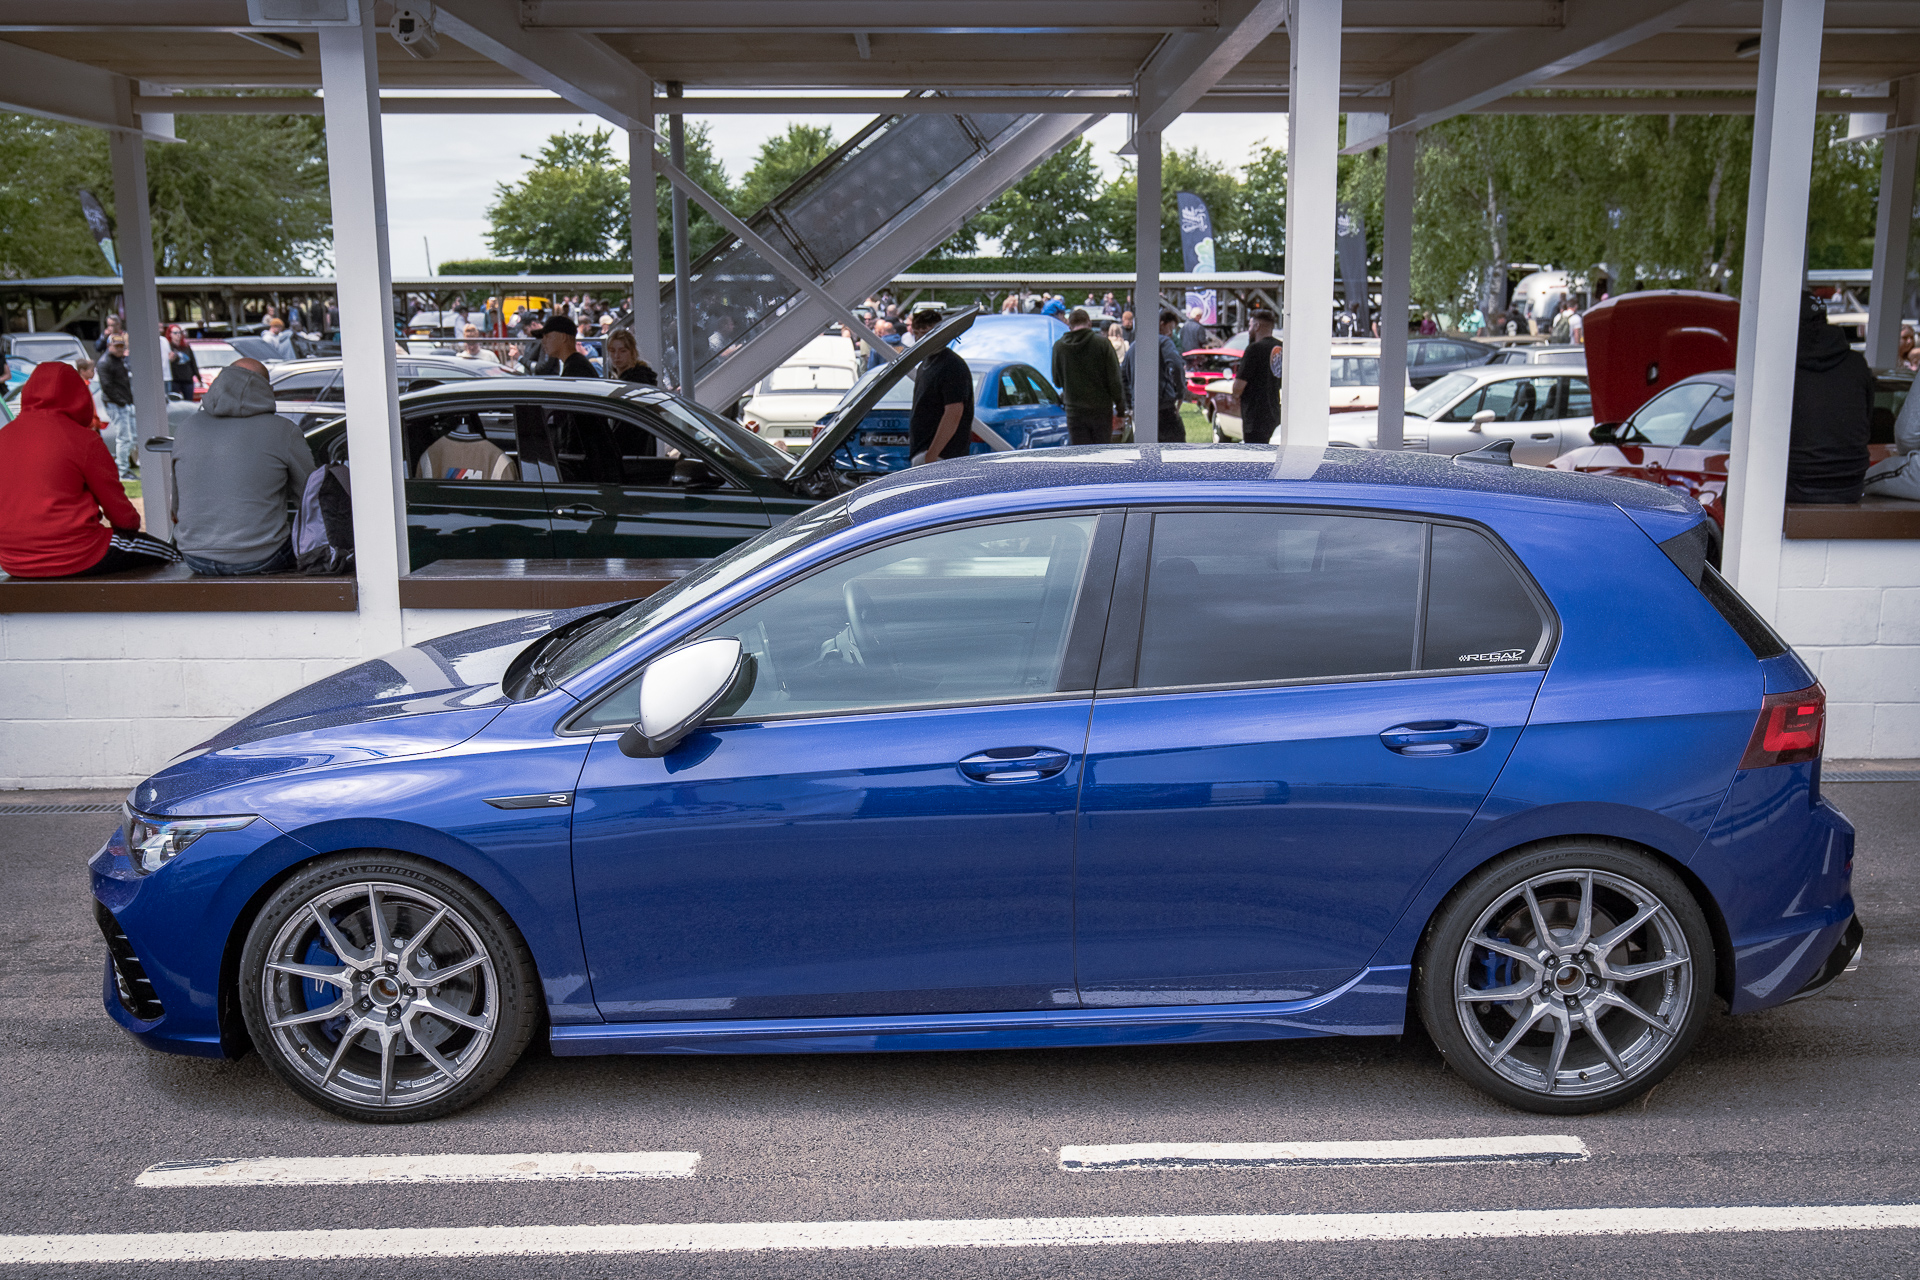 VW MK8 Golf R at Players Classic 2022